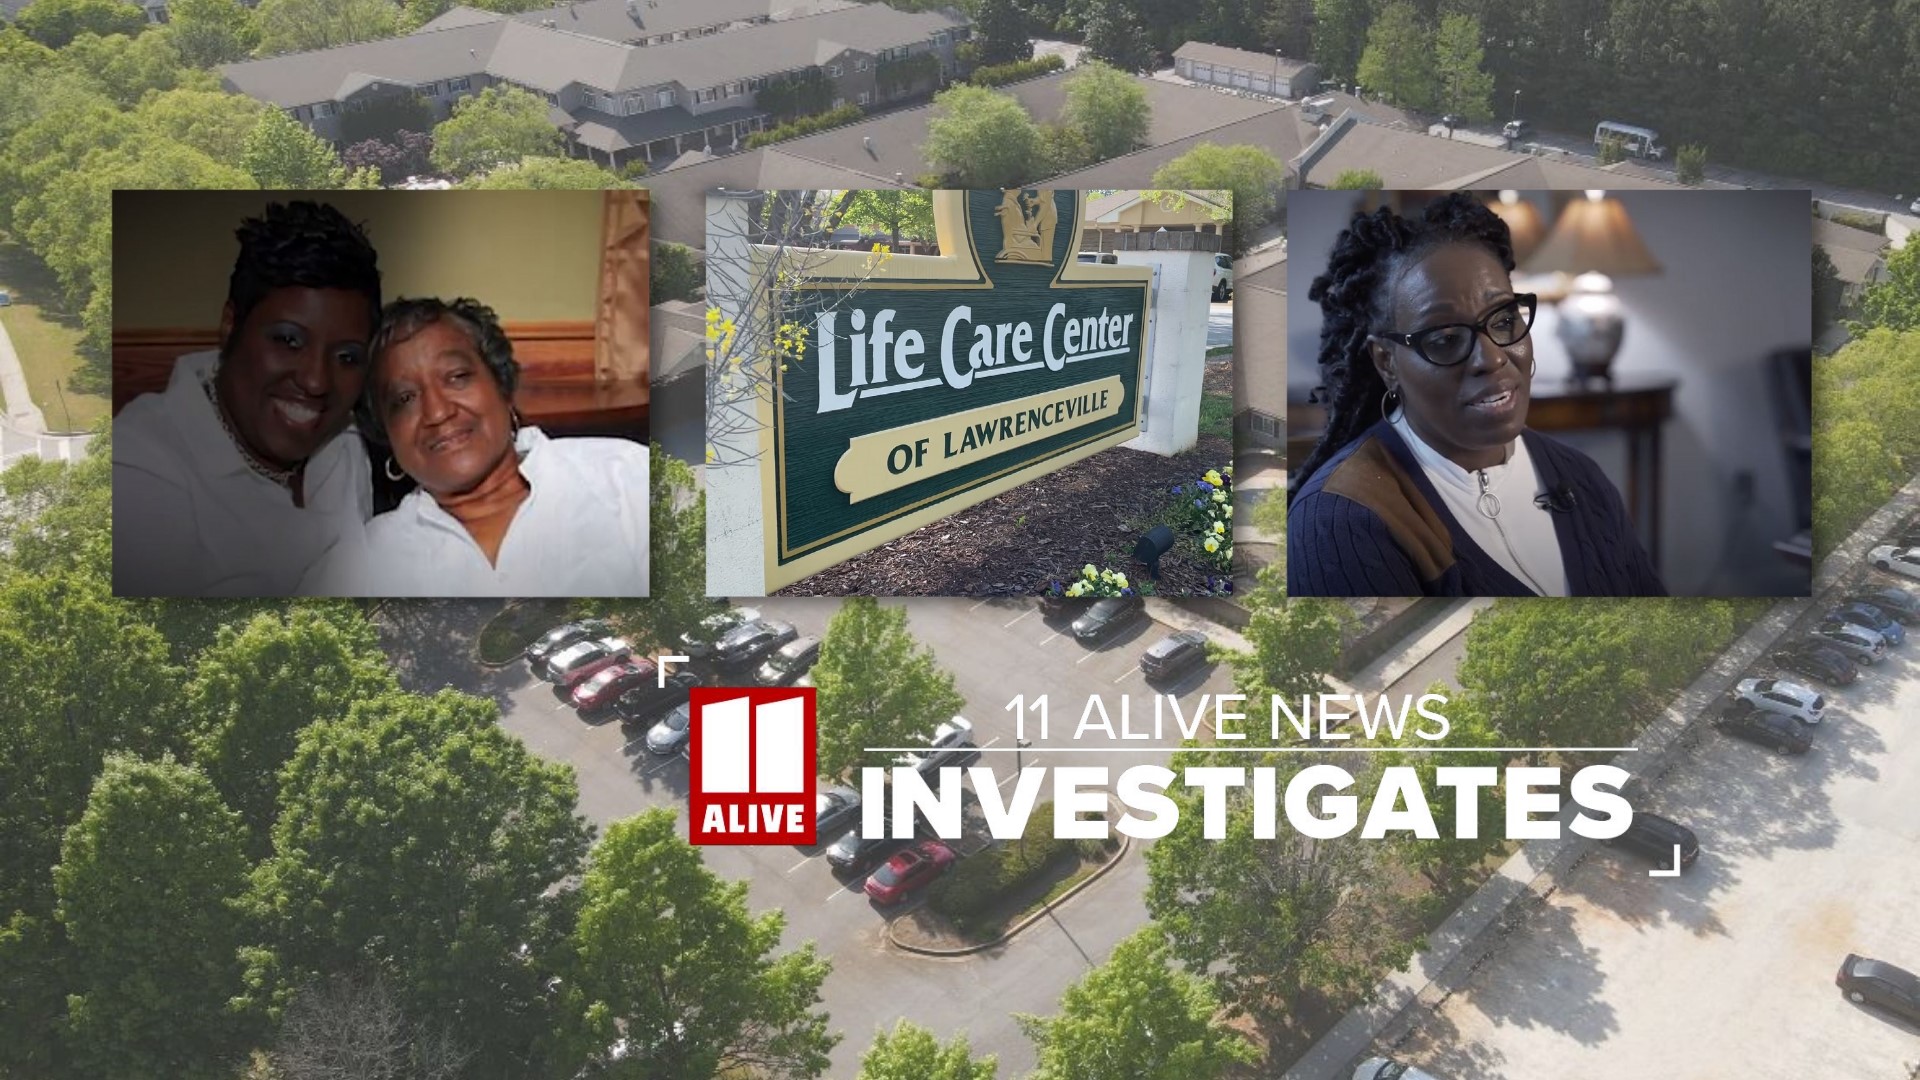 A grandmother's family was awarded $6 million after she died at a Gwinnett County nursing home with a history of violations.